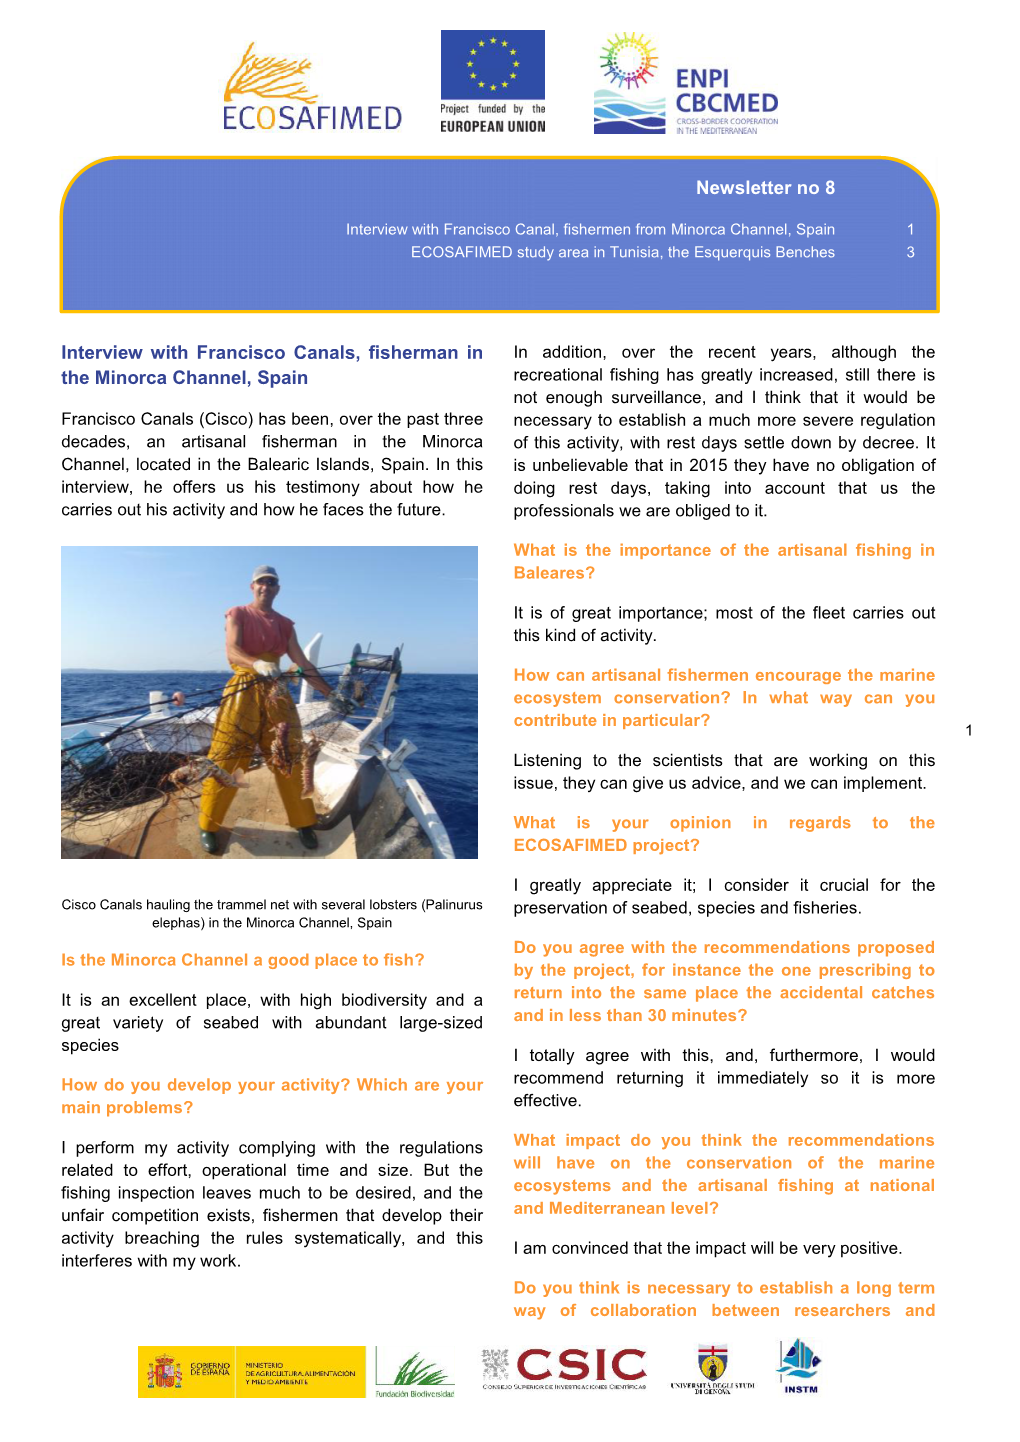 Interview with Francisco Canals, Fisherman in the Minorca Channel